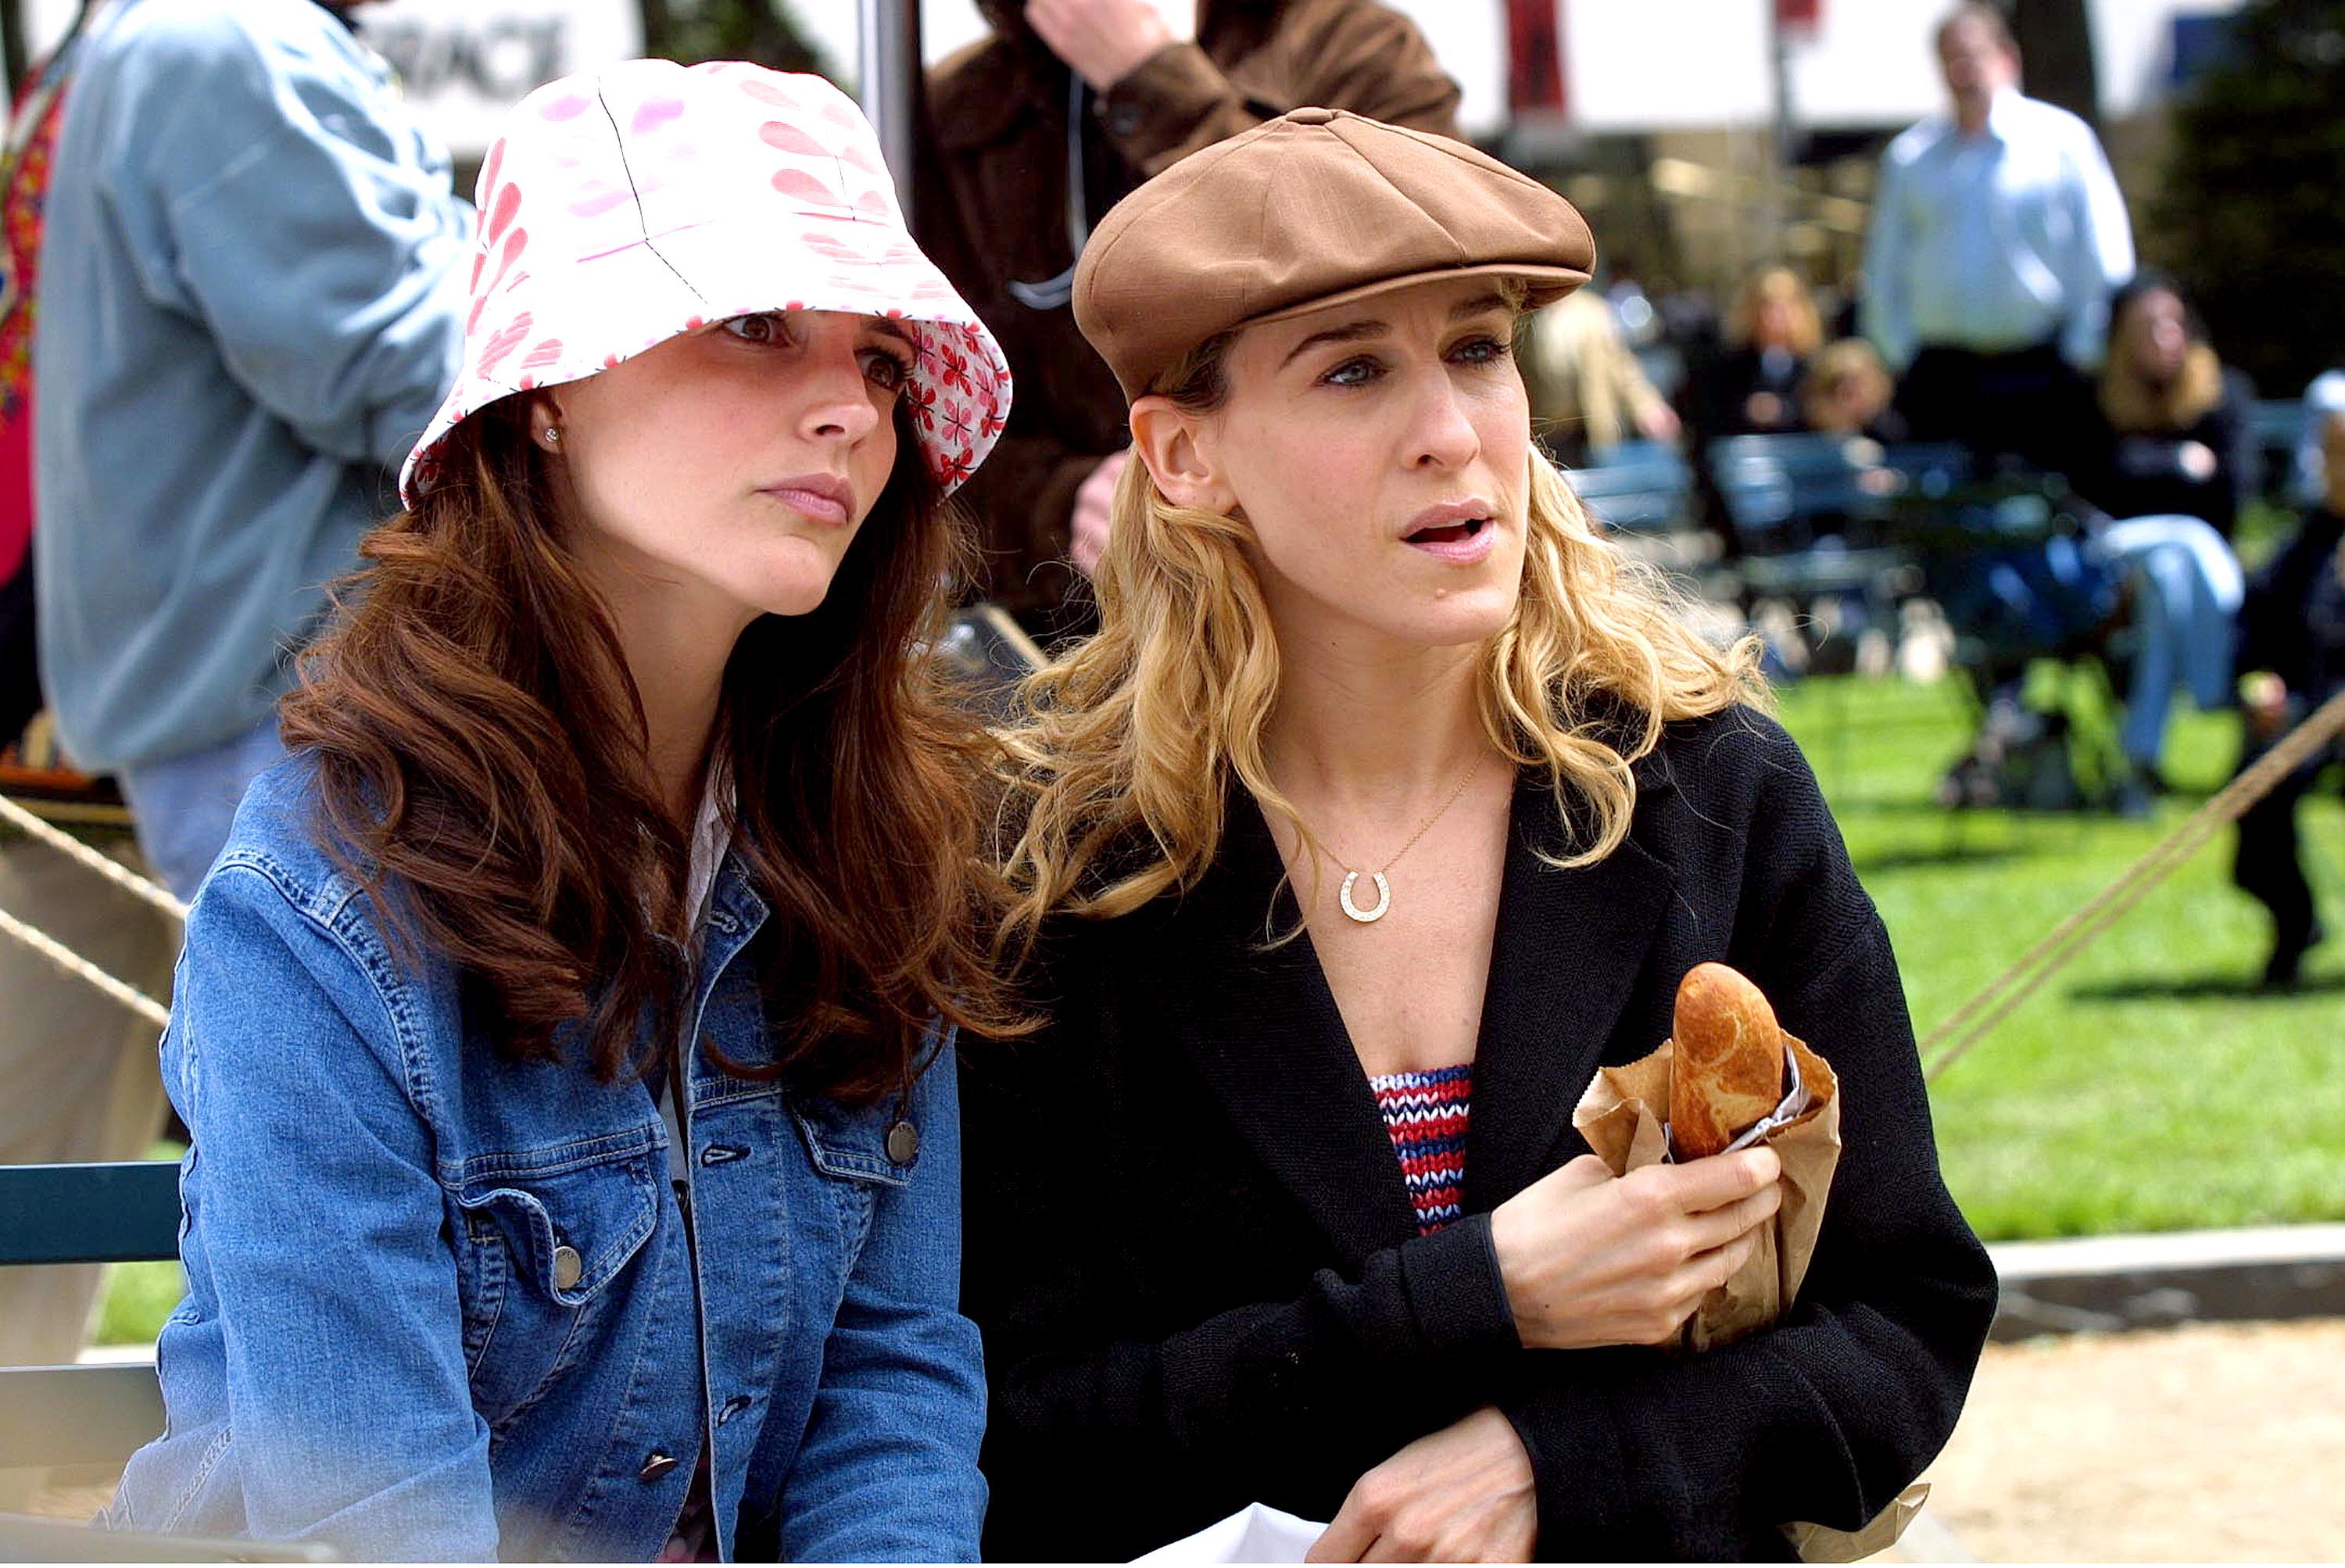 Kristin Davis and Sarah Jessica Parker seen on location for "Sex and the City" at Central Park on May 8, 2001 in New York City. | Source: Getty Images